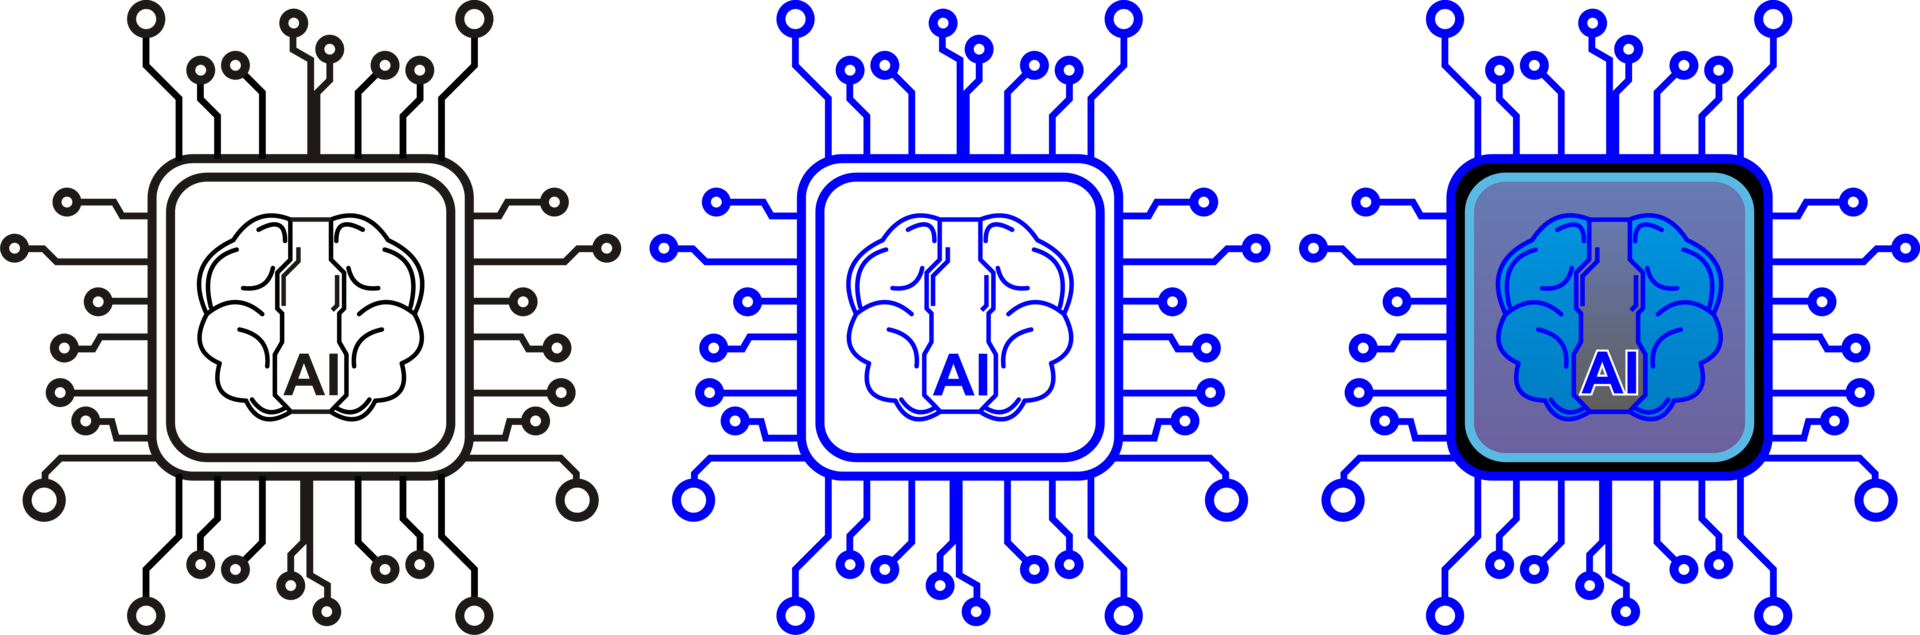 artificial intelligence brain icon design png